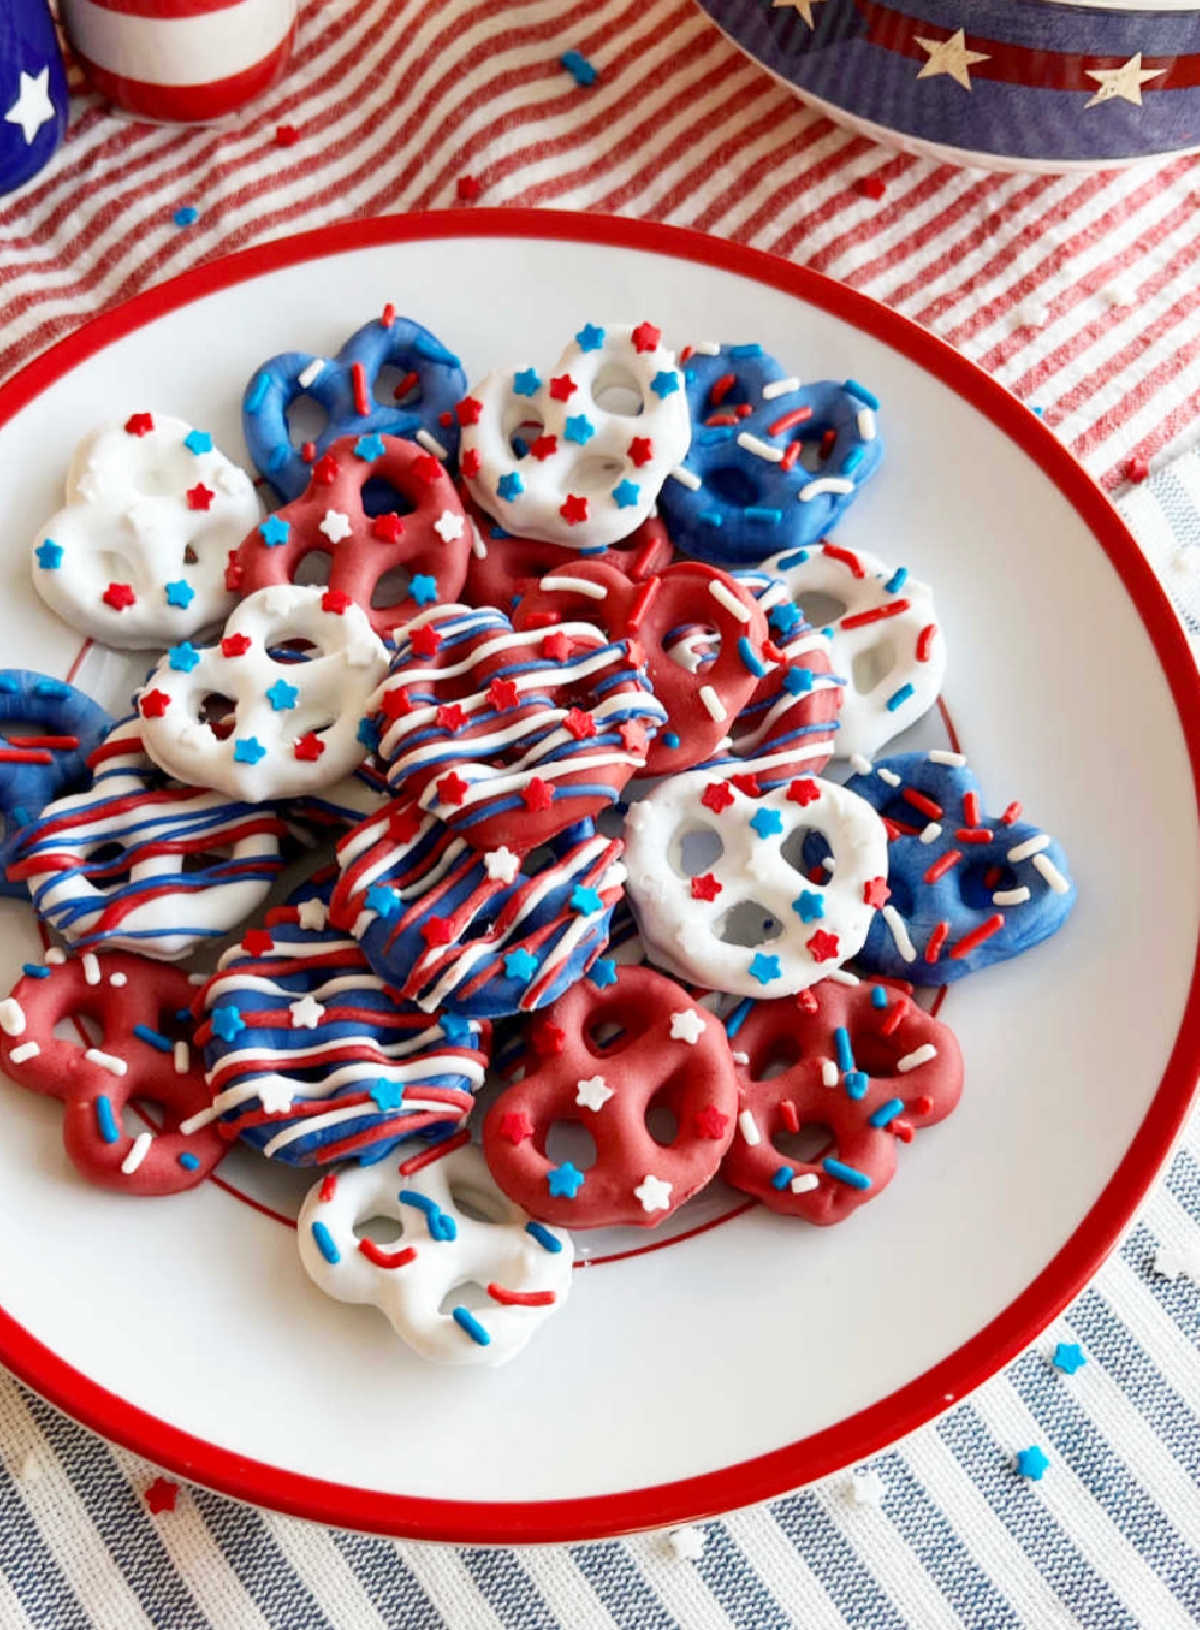 red white and blue chocolate covered pretzels with patriotic sprinkles on 4th of July table.